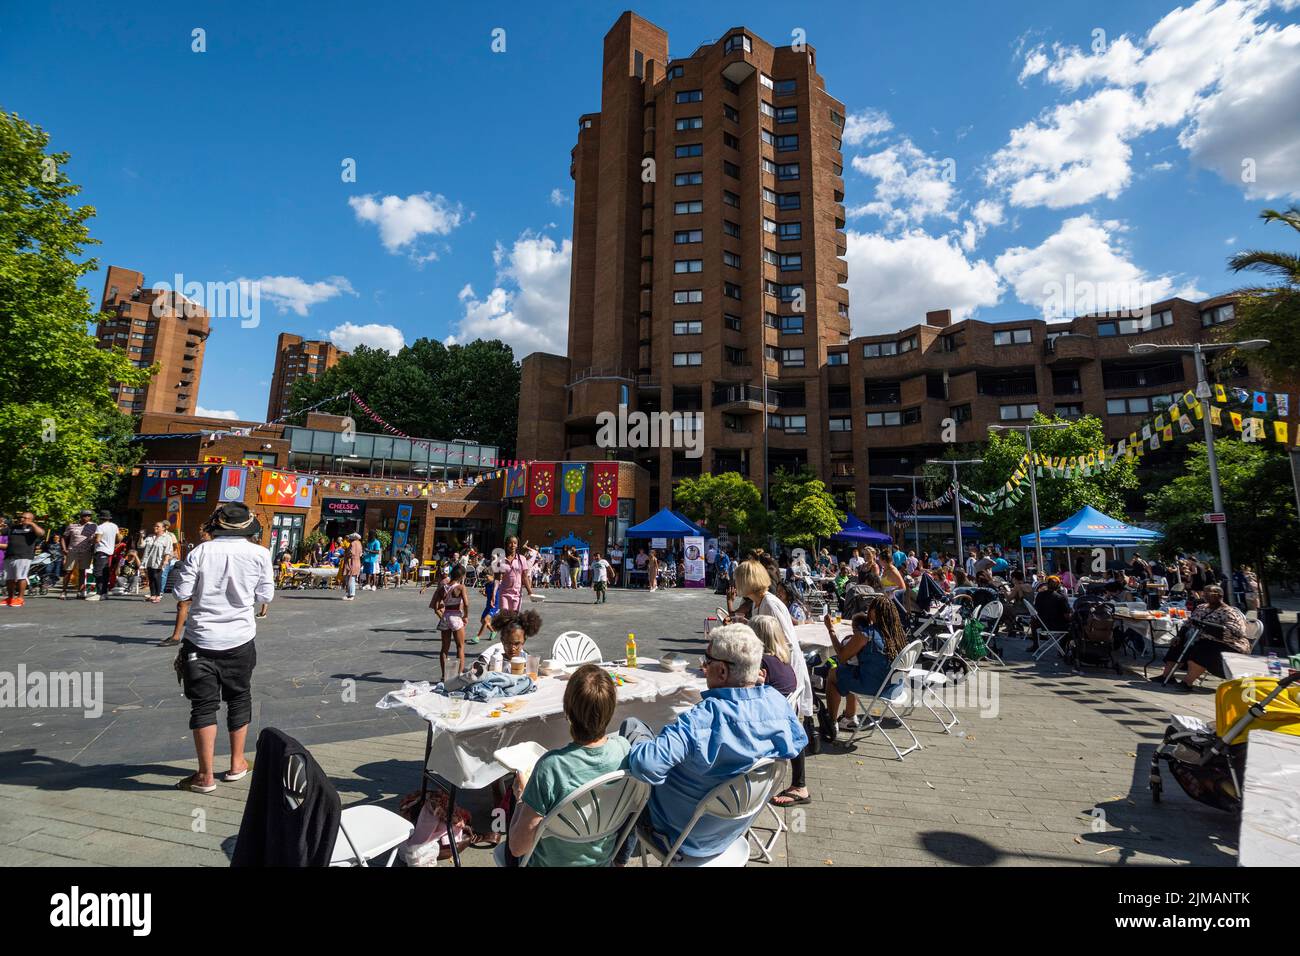 London, UK.  5 August 2022. The public around the performance area at Carnival in Chelsea, an event showcasing carnival costumes, music and culture.  The show is outside The Chelsea Theatre and is part of this year’s Kensington & Chelsea Festival. Credit: Stephen Chung / Alamy Live News Stock Photo